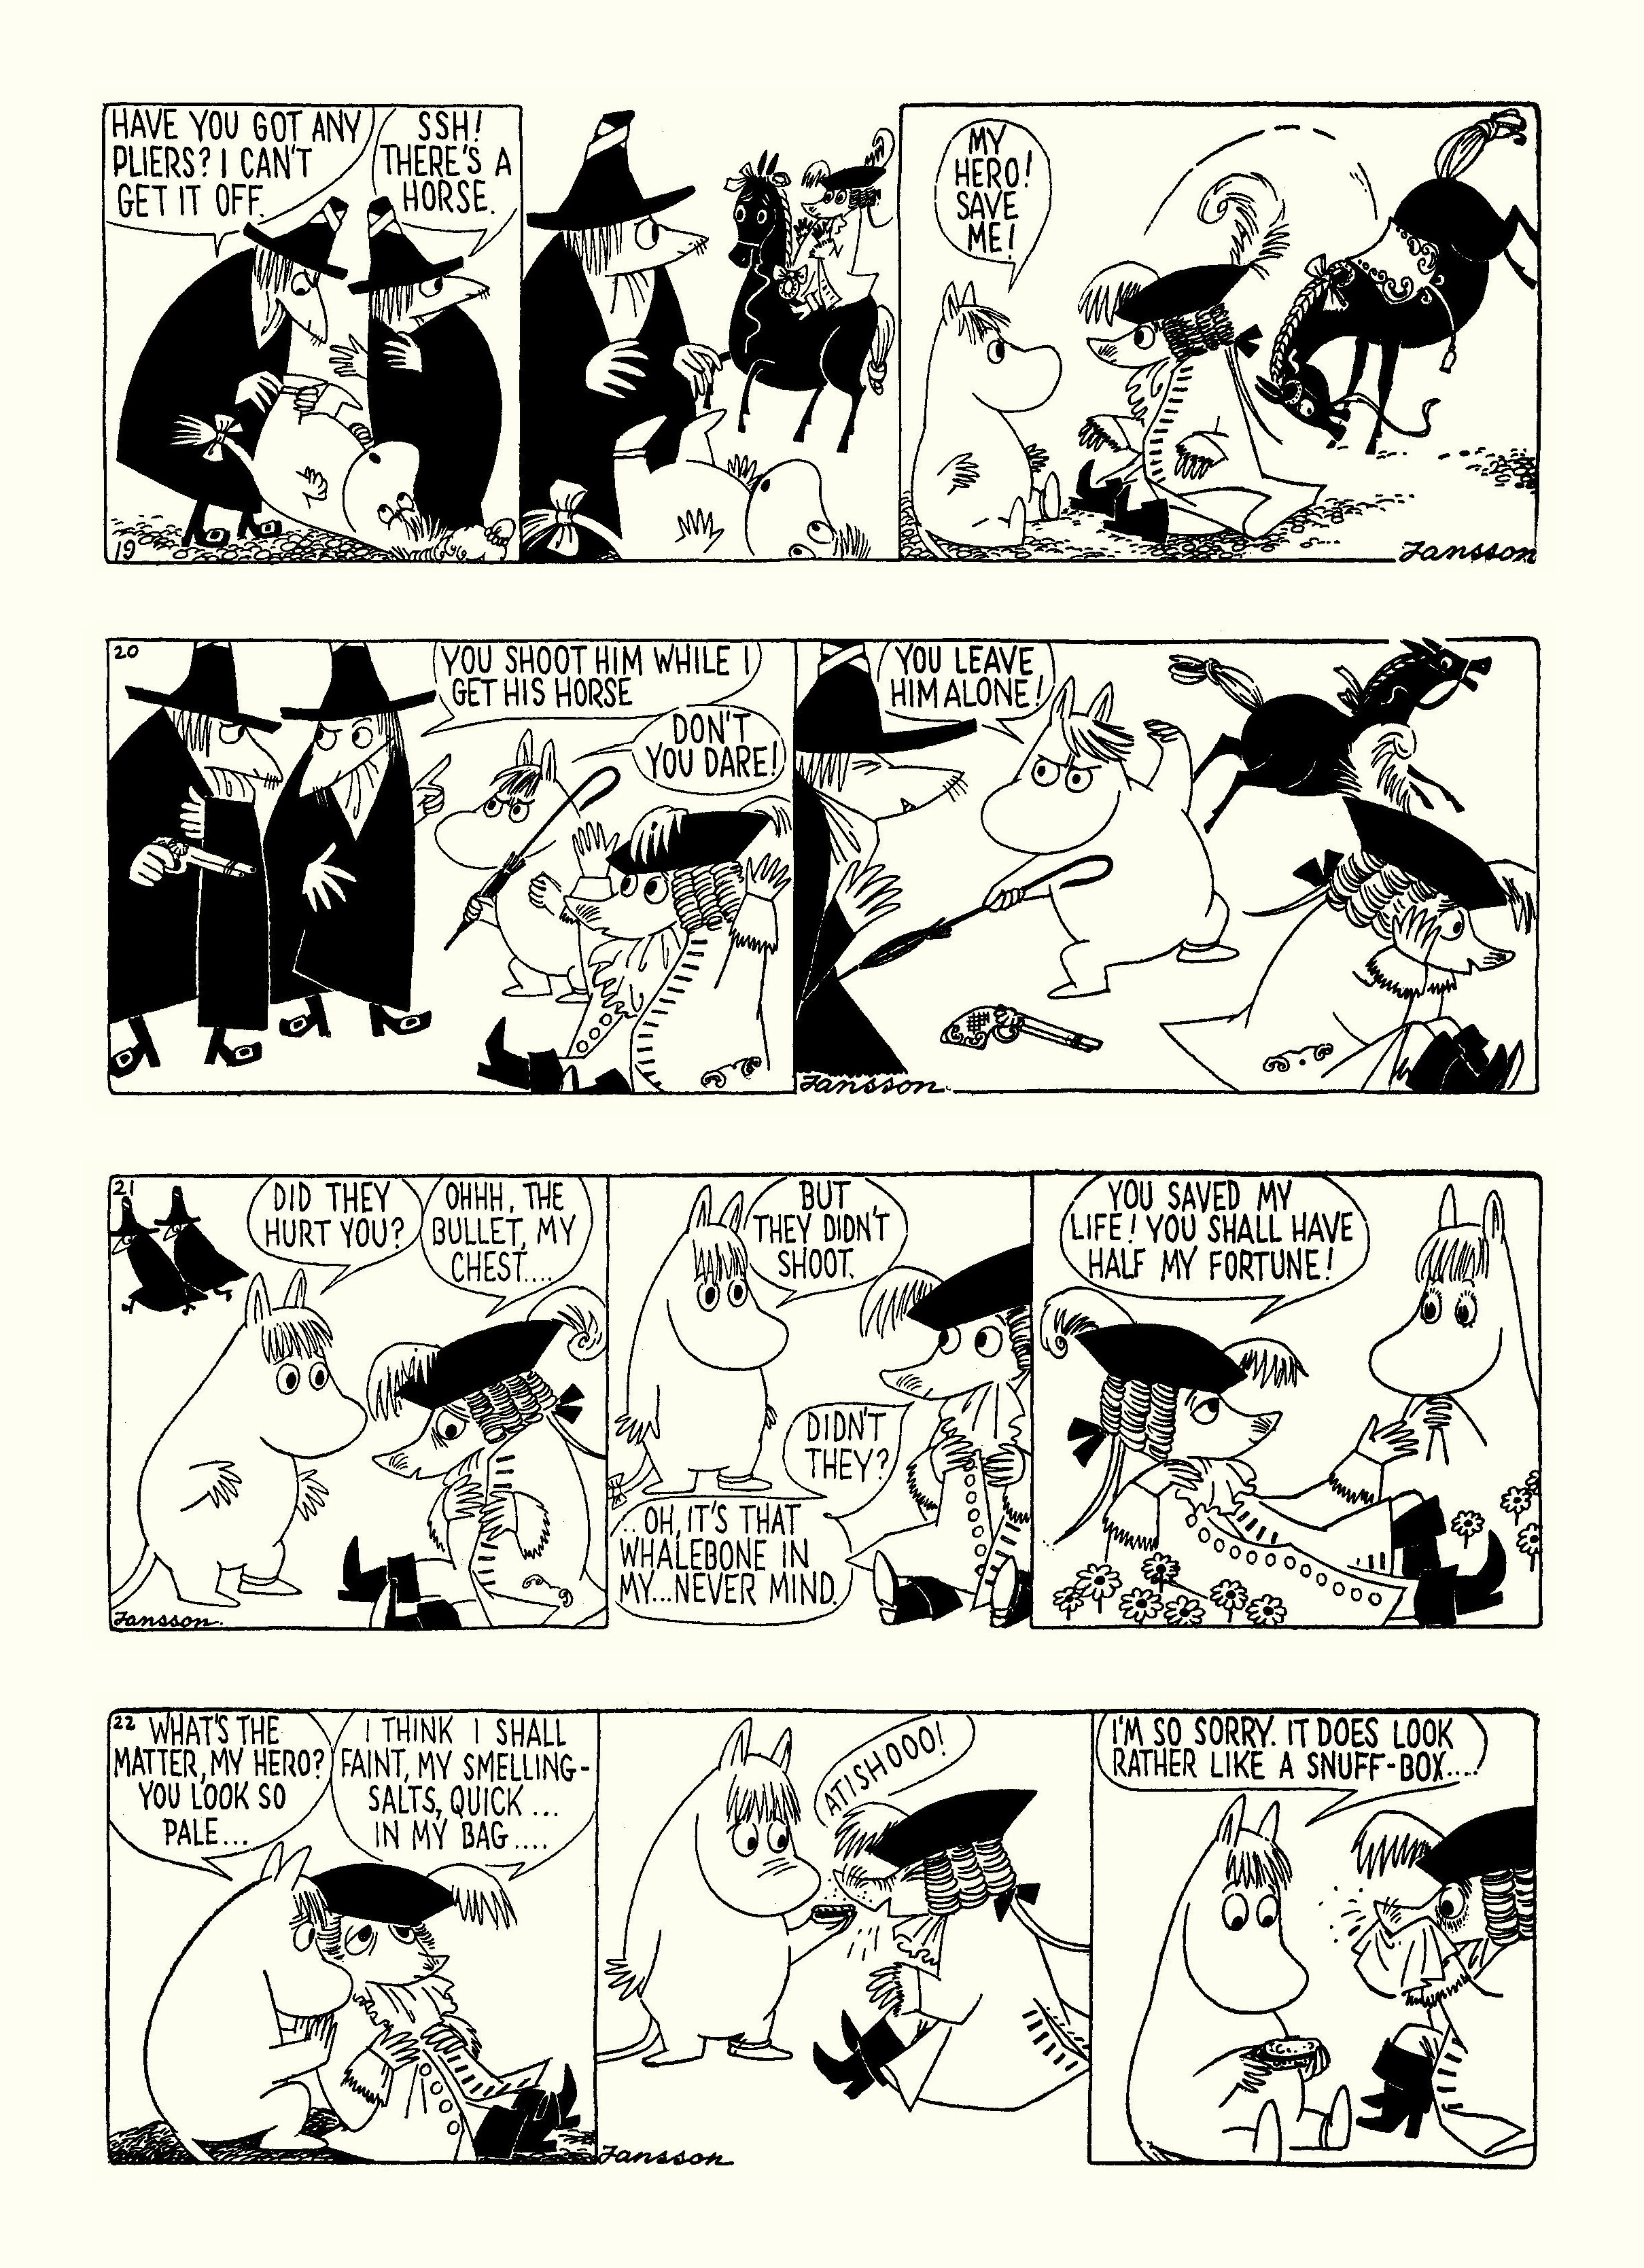 Read online Moomin: The Complete Tove Jansson Comic Strip comic -  Issue # TPB 4 - 28